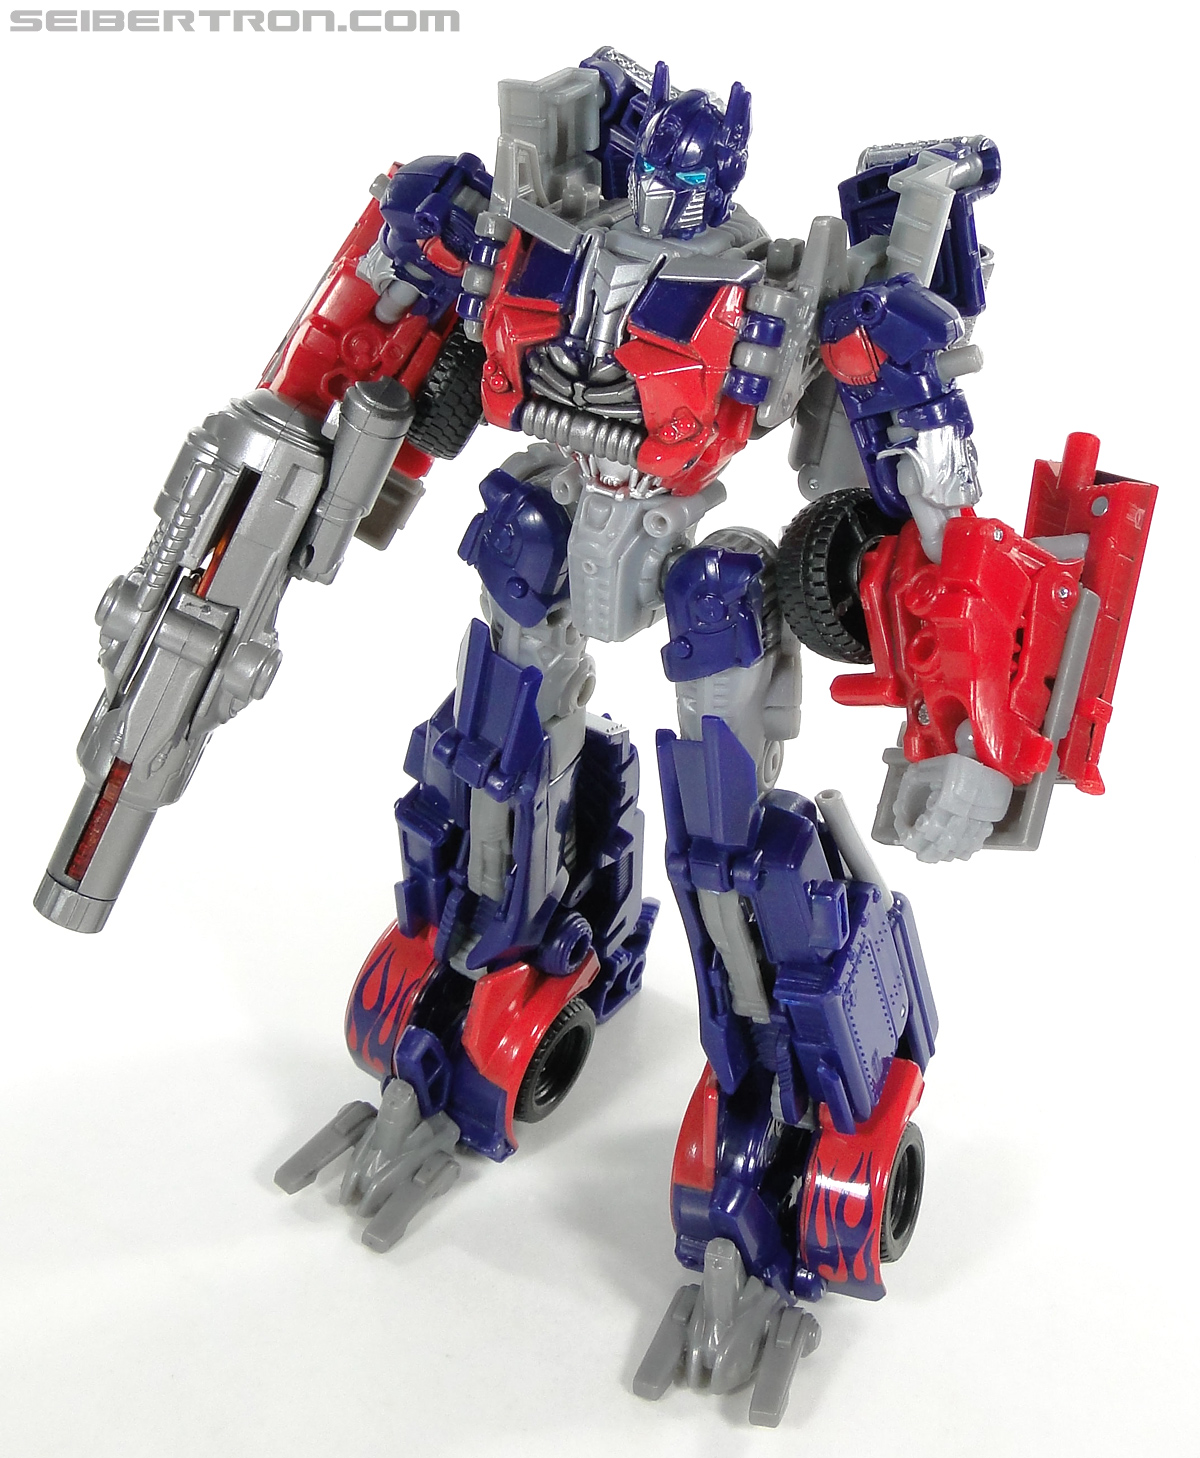 Transformers Dark of the Moon Optimus Prime with Mechtech Trailer (Image #147 of 248)